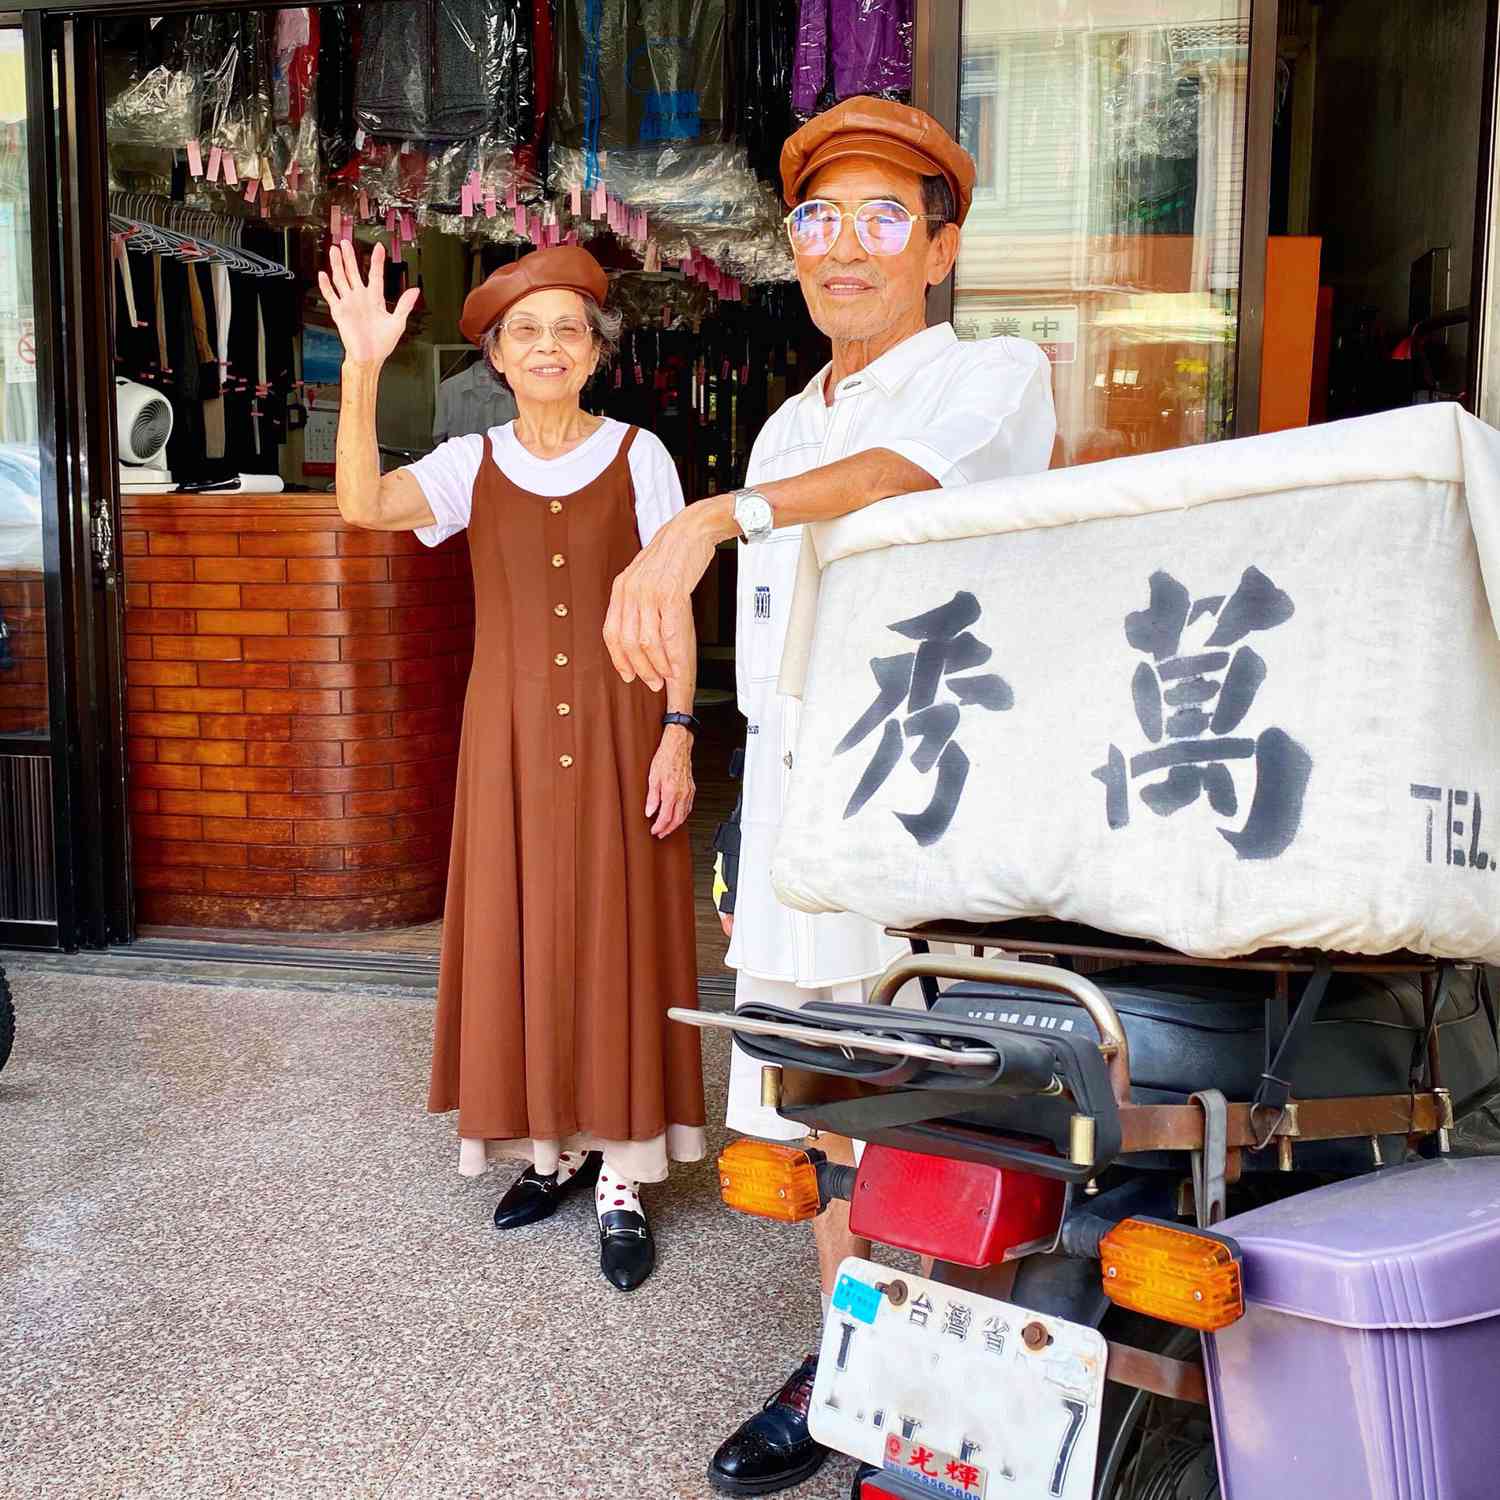 Taiwan elderly couple become IG celebrities by modeling leftover clothes in laundry, Taichung - 14 Jun 2020